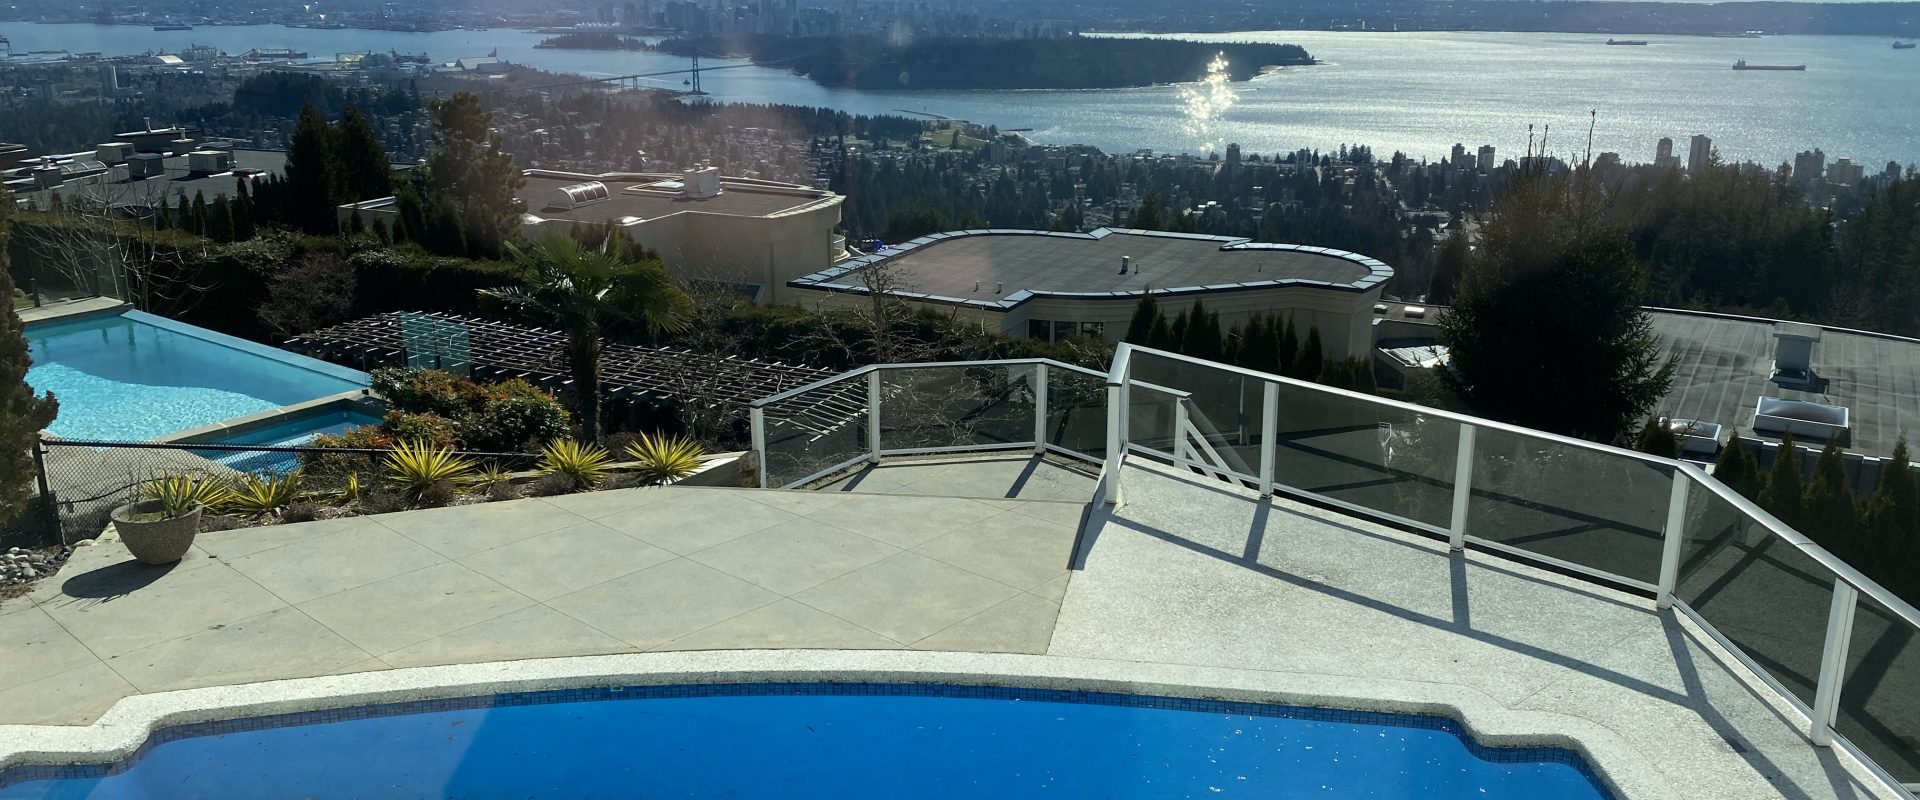 West Van Newly Renovated 360-degree Panoramic House with Swimming Pool